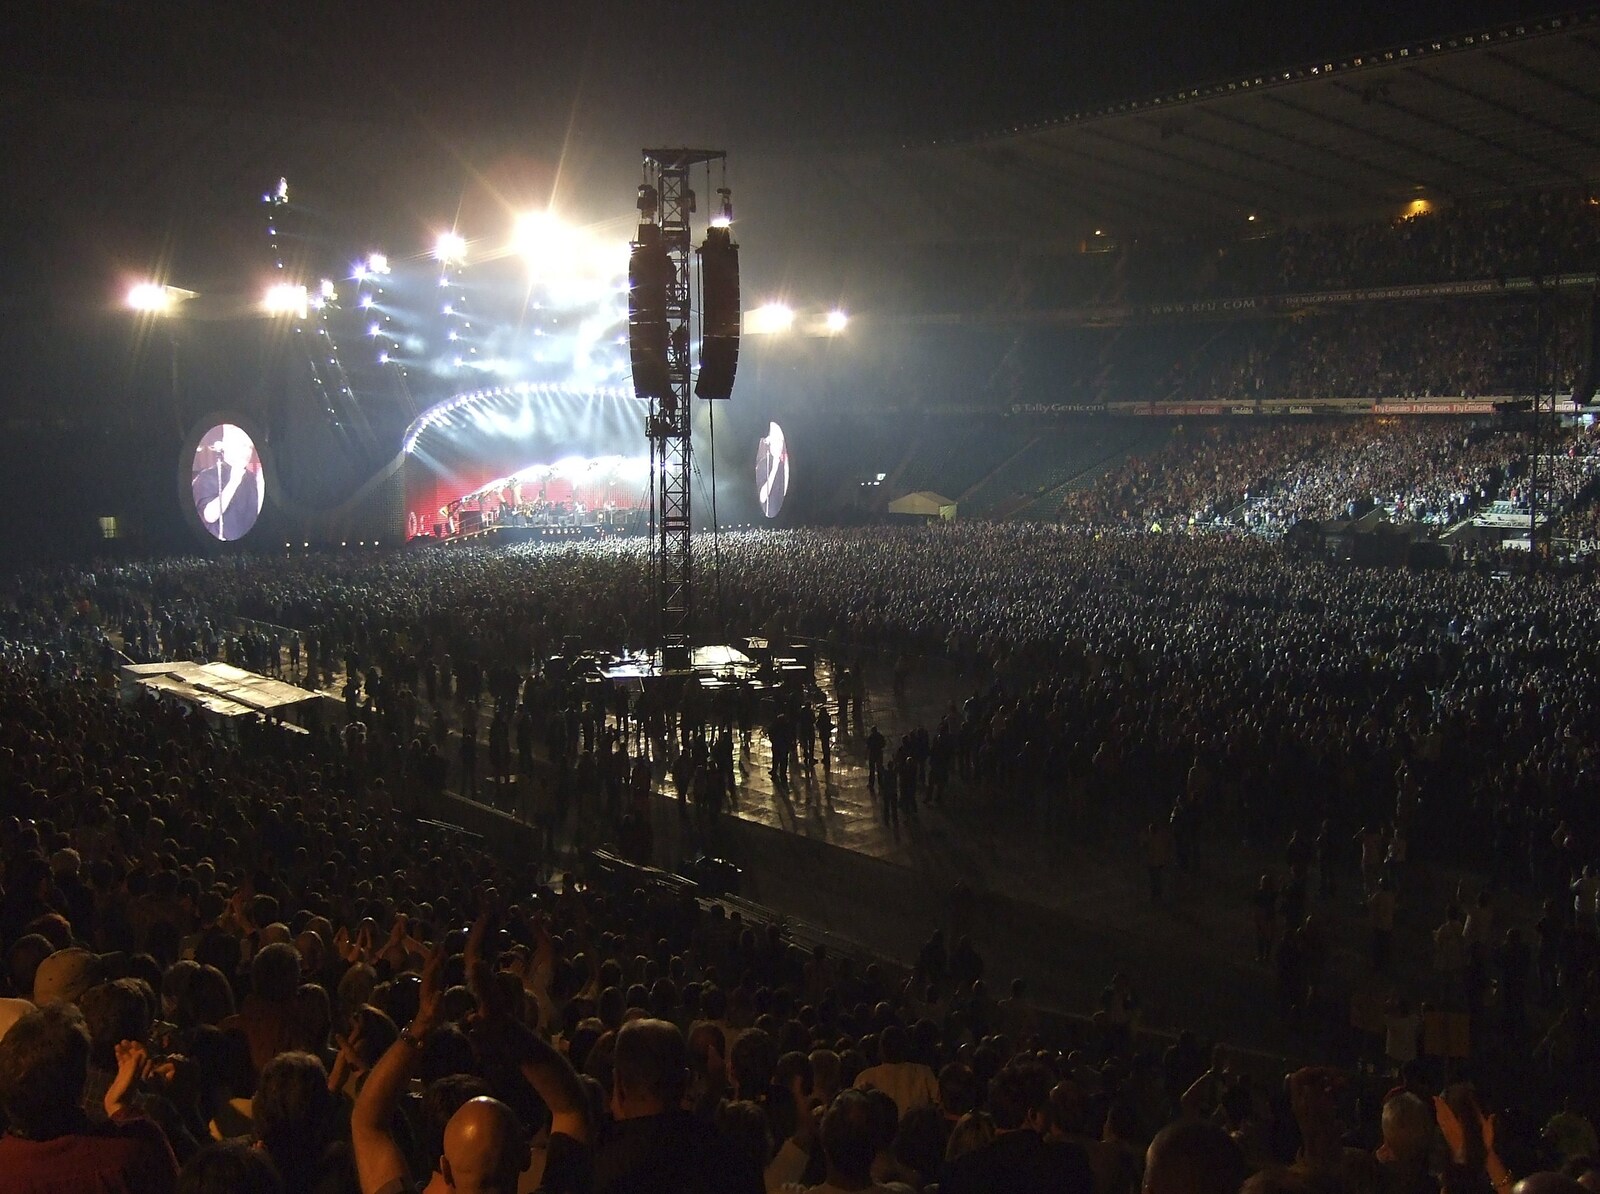 Genesis Live at Twickenham, and Music on Parker's Piece, London and Cambridge - 8th July 2007: A sea of people